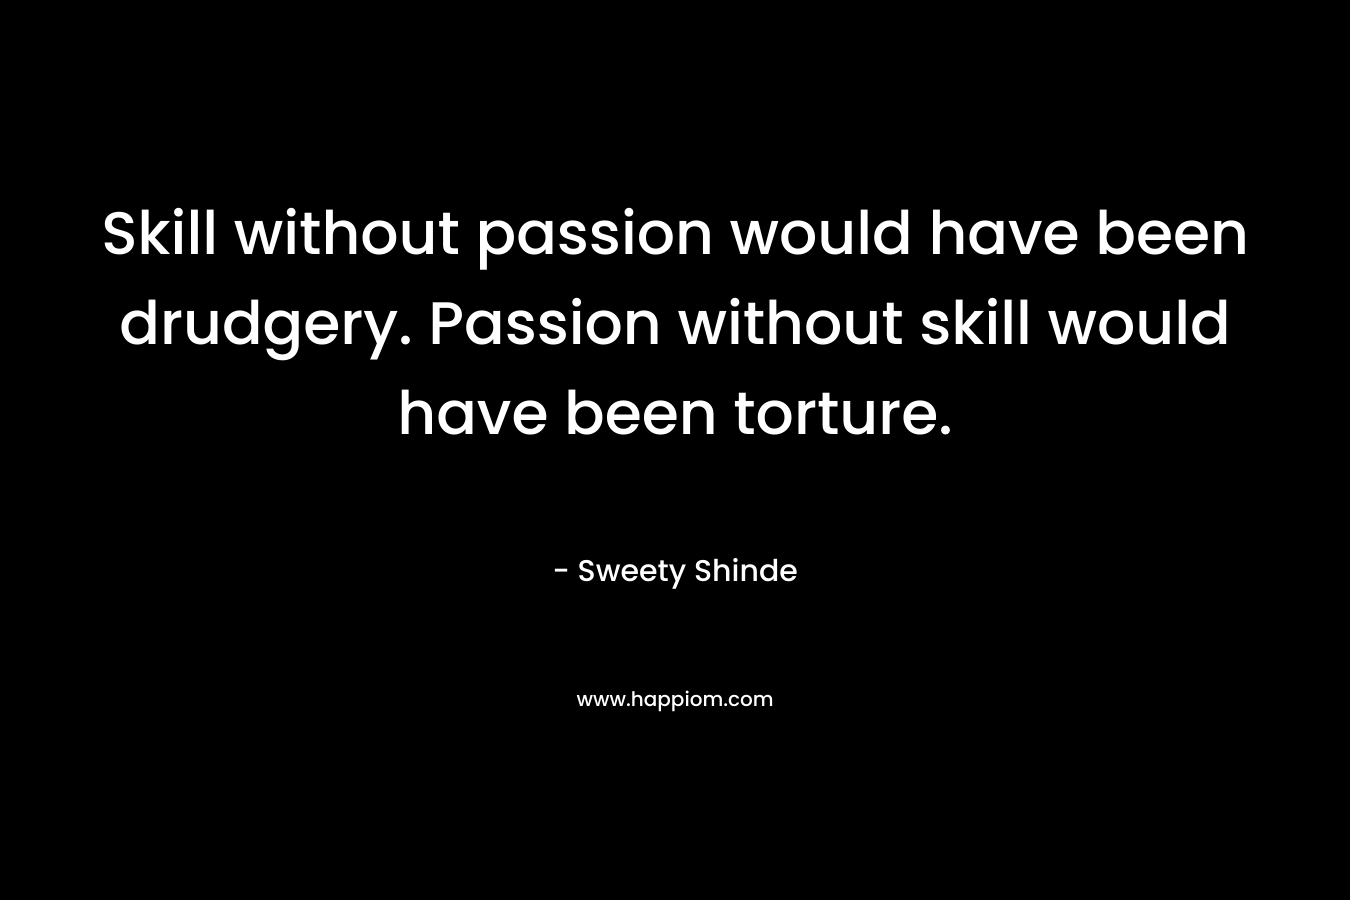 Skill without passion would have been drudgery. Passion without skill would have been torture.